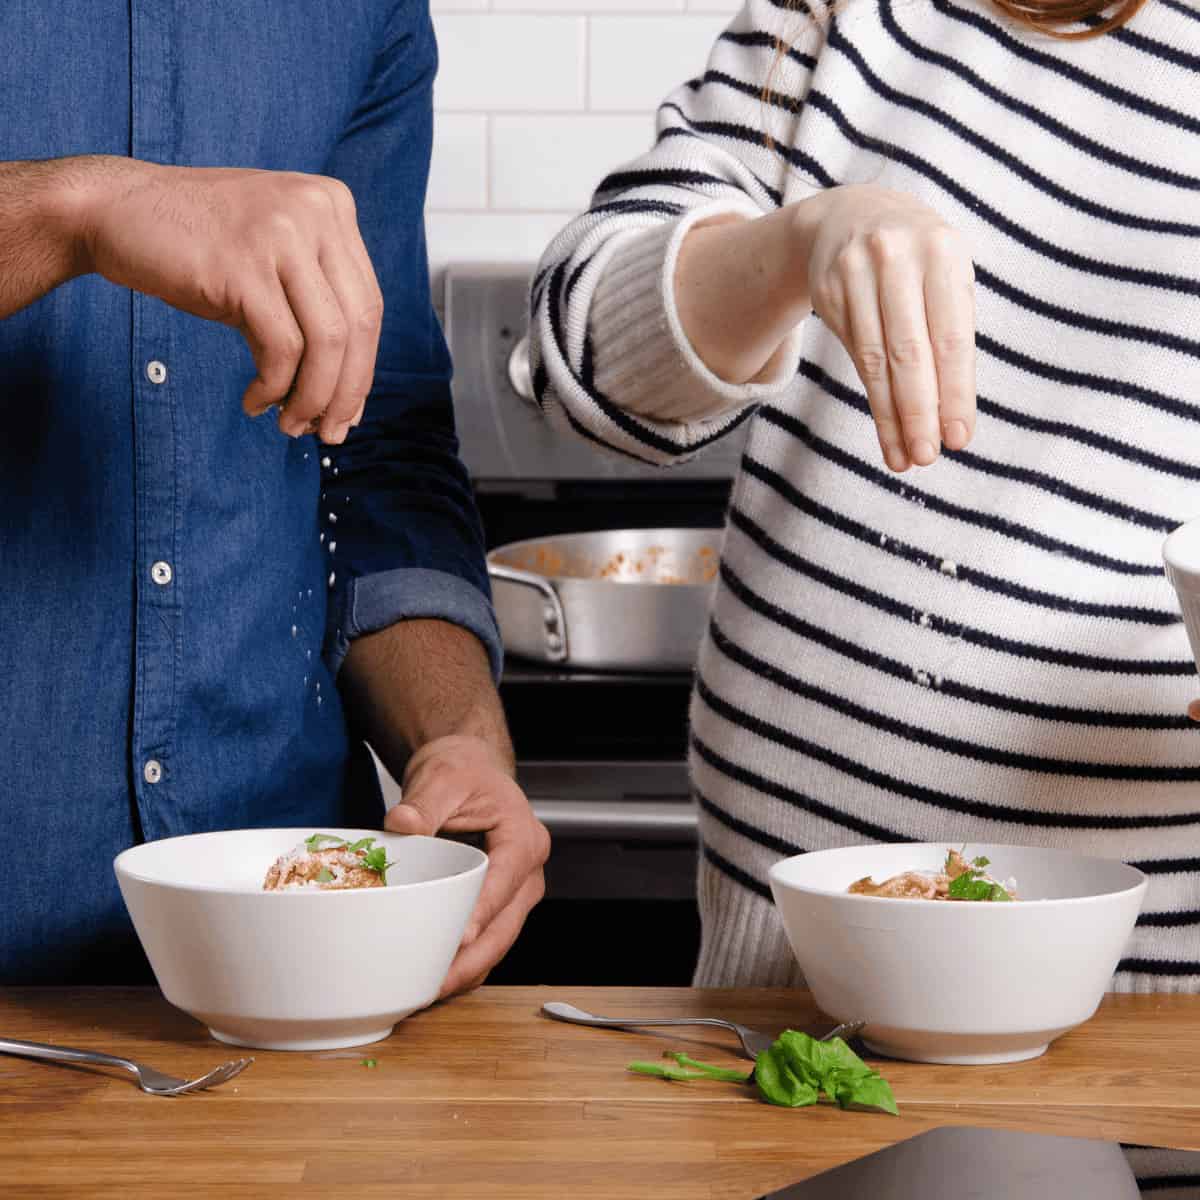 A man and woman sprinkling parmesan onto a bowl of spaghetti in their kitchen.